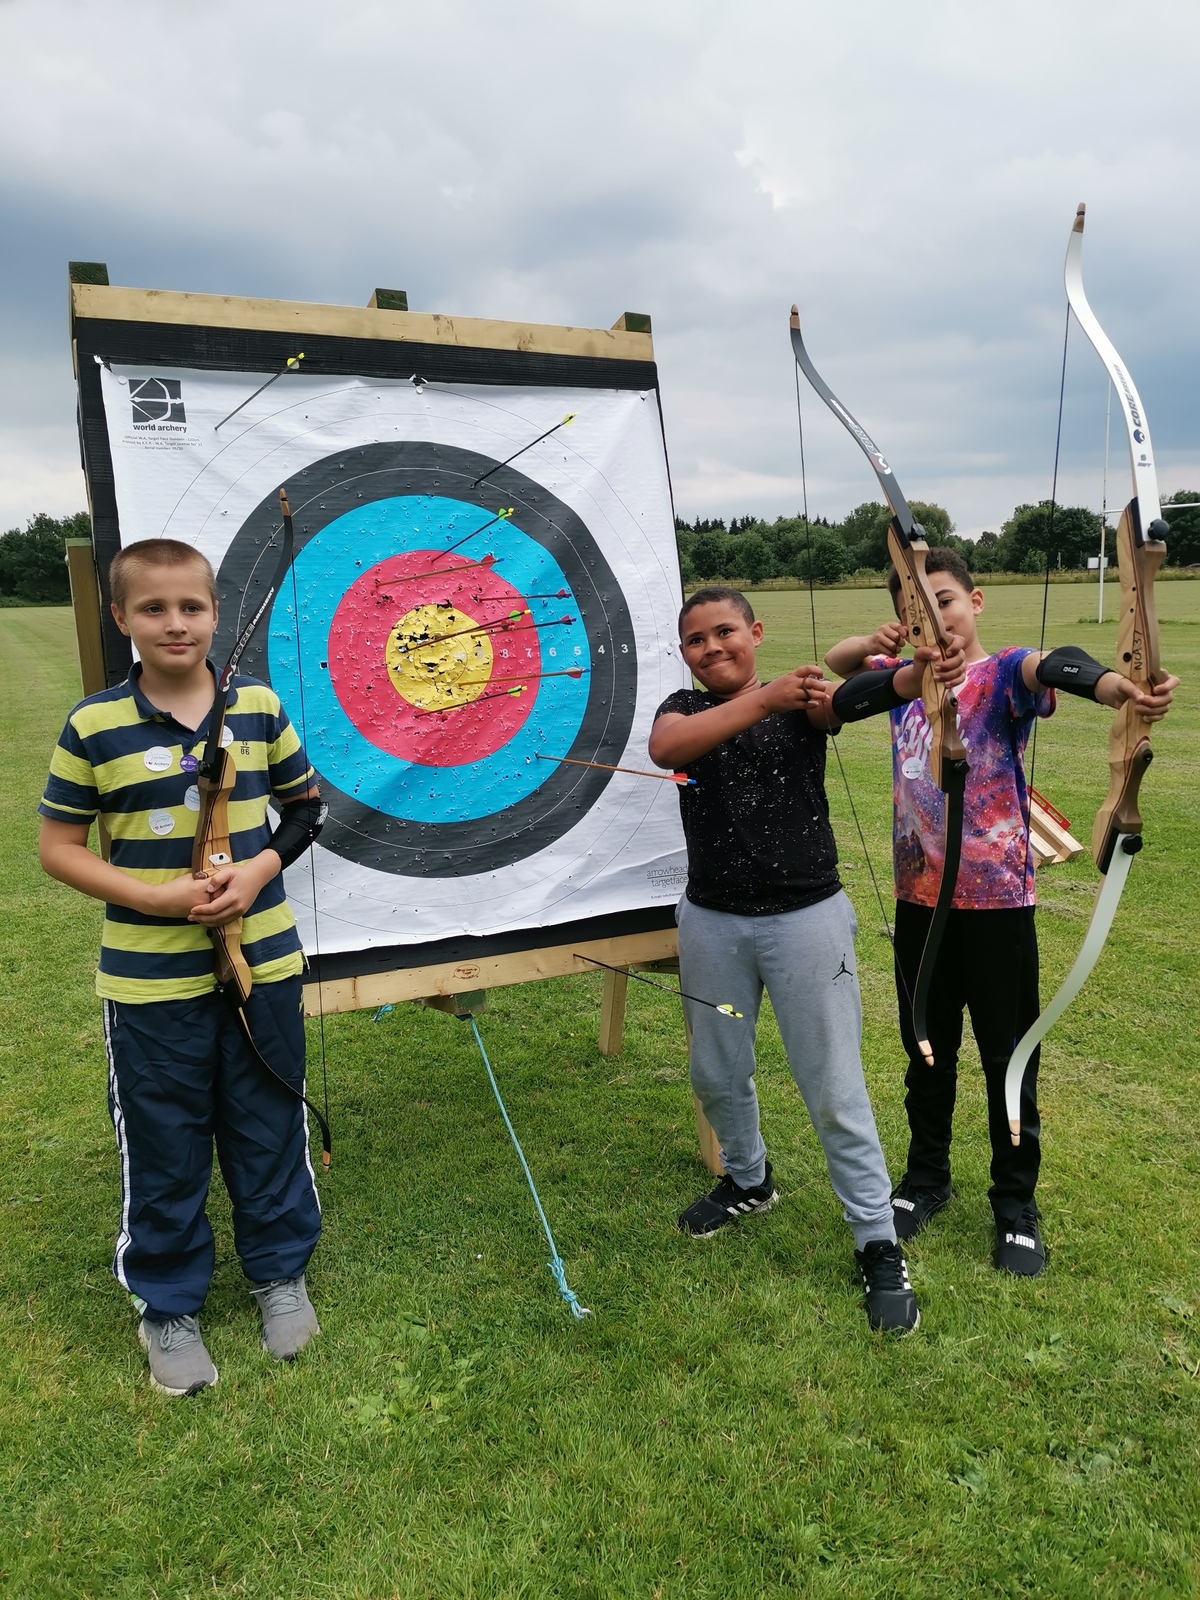 Young archers standing by archery target